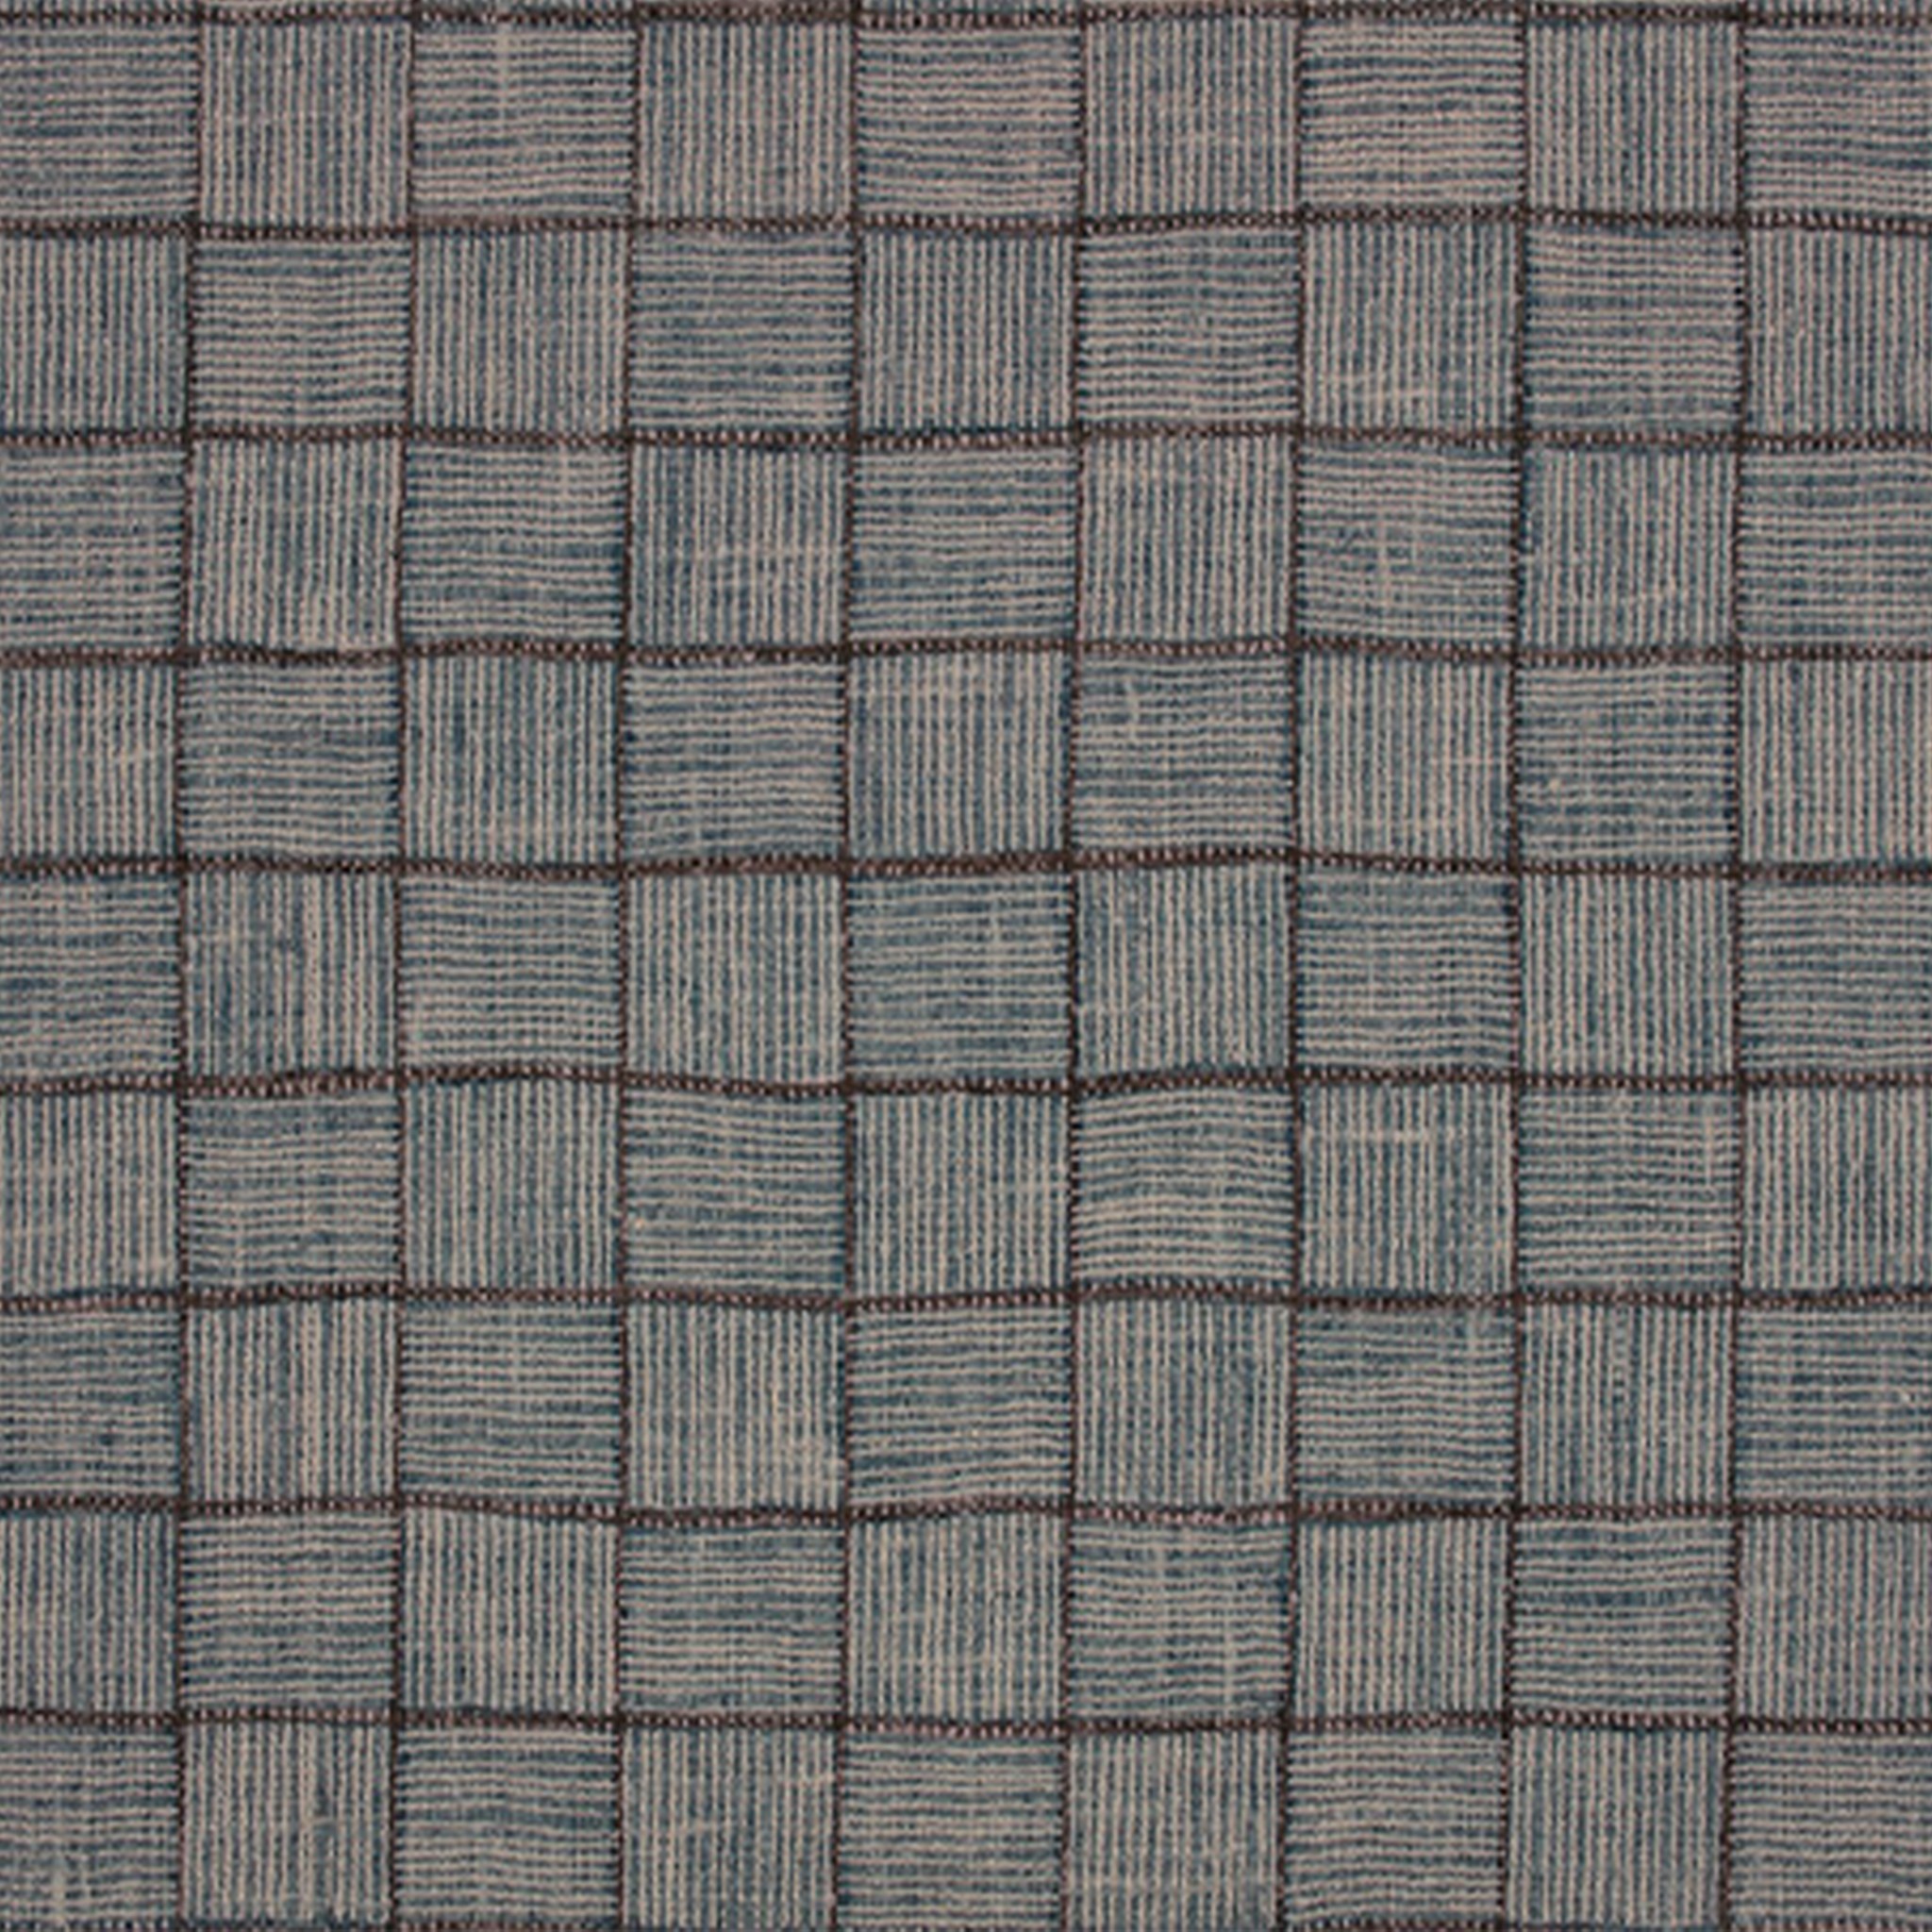 a close up of a blue and brown checkered fabric